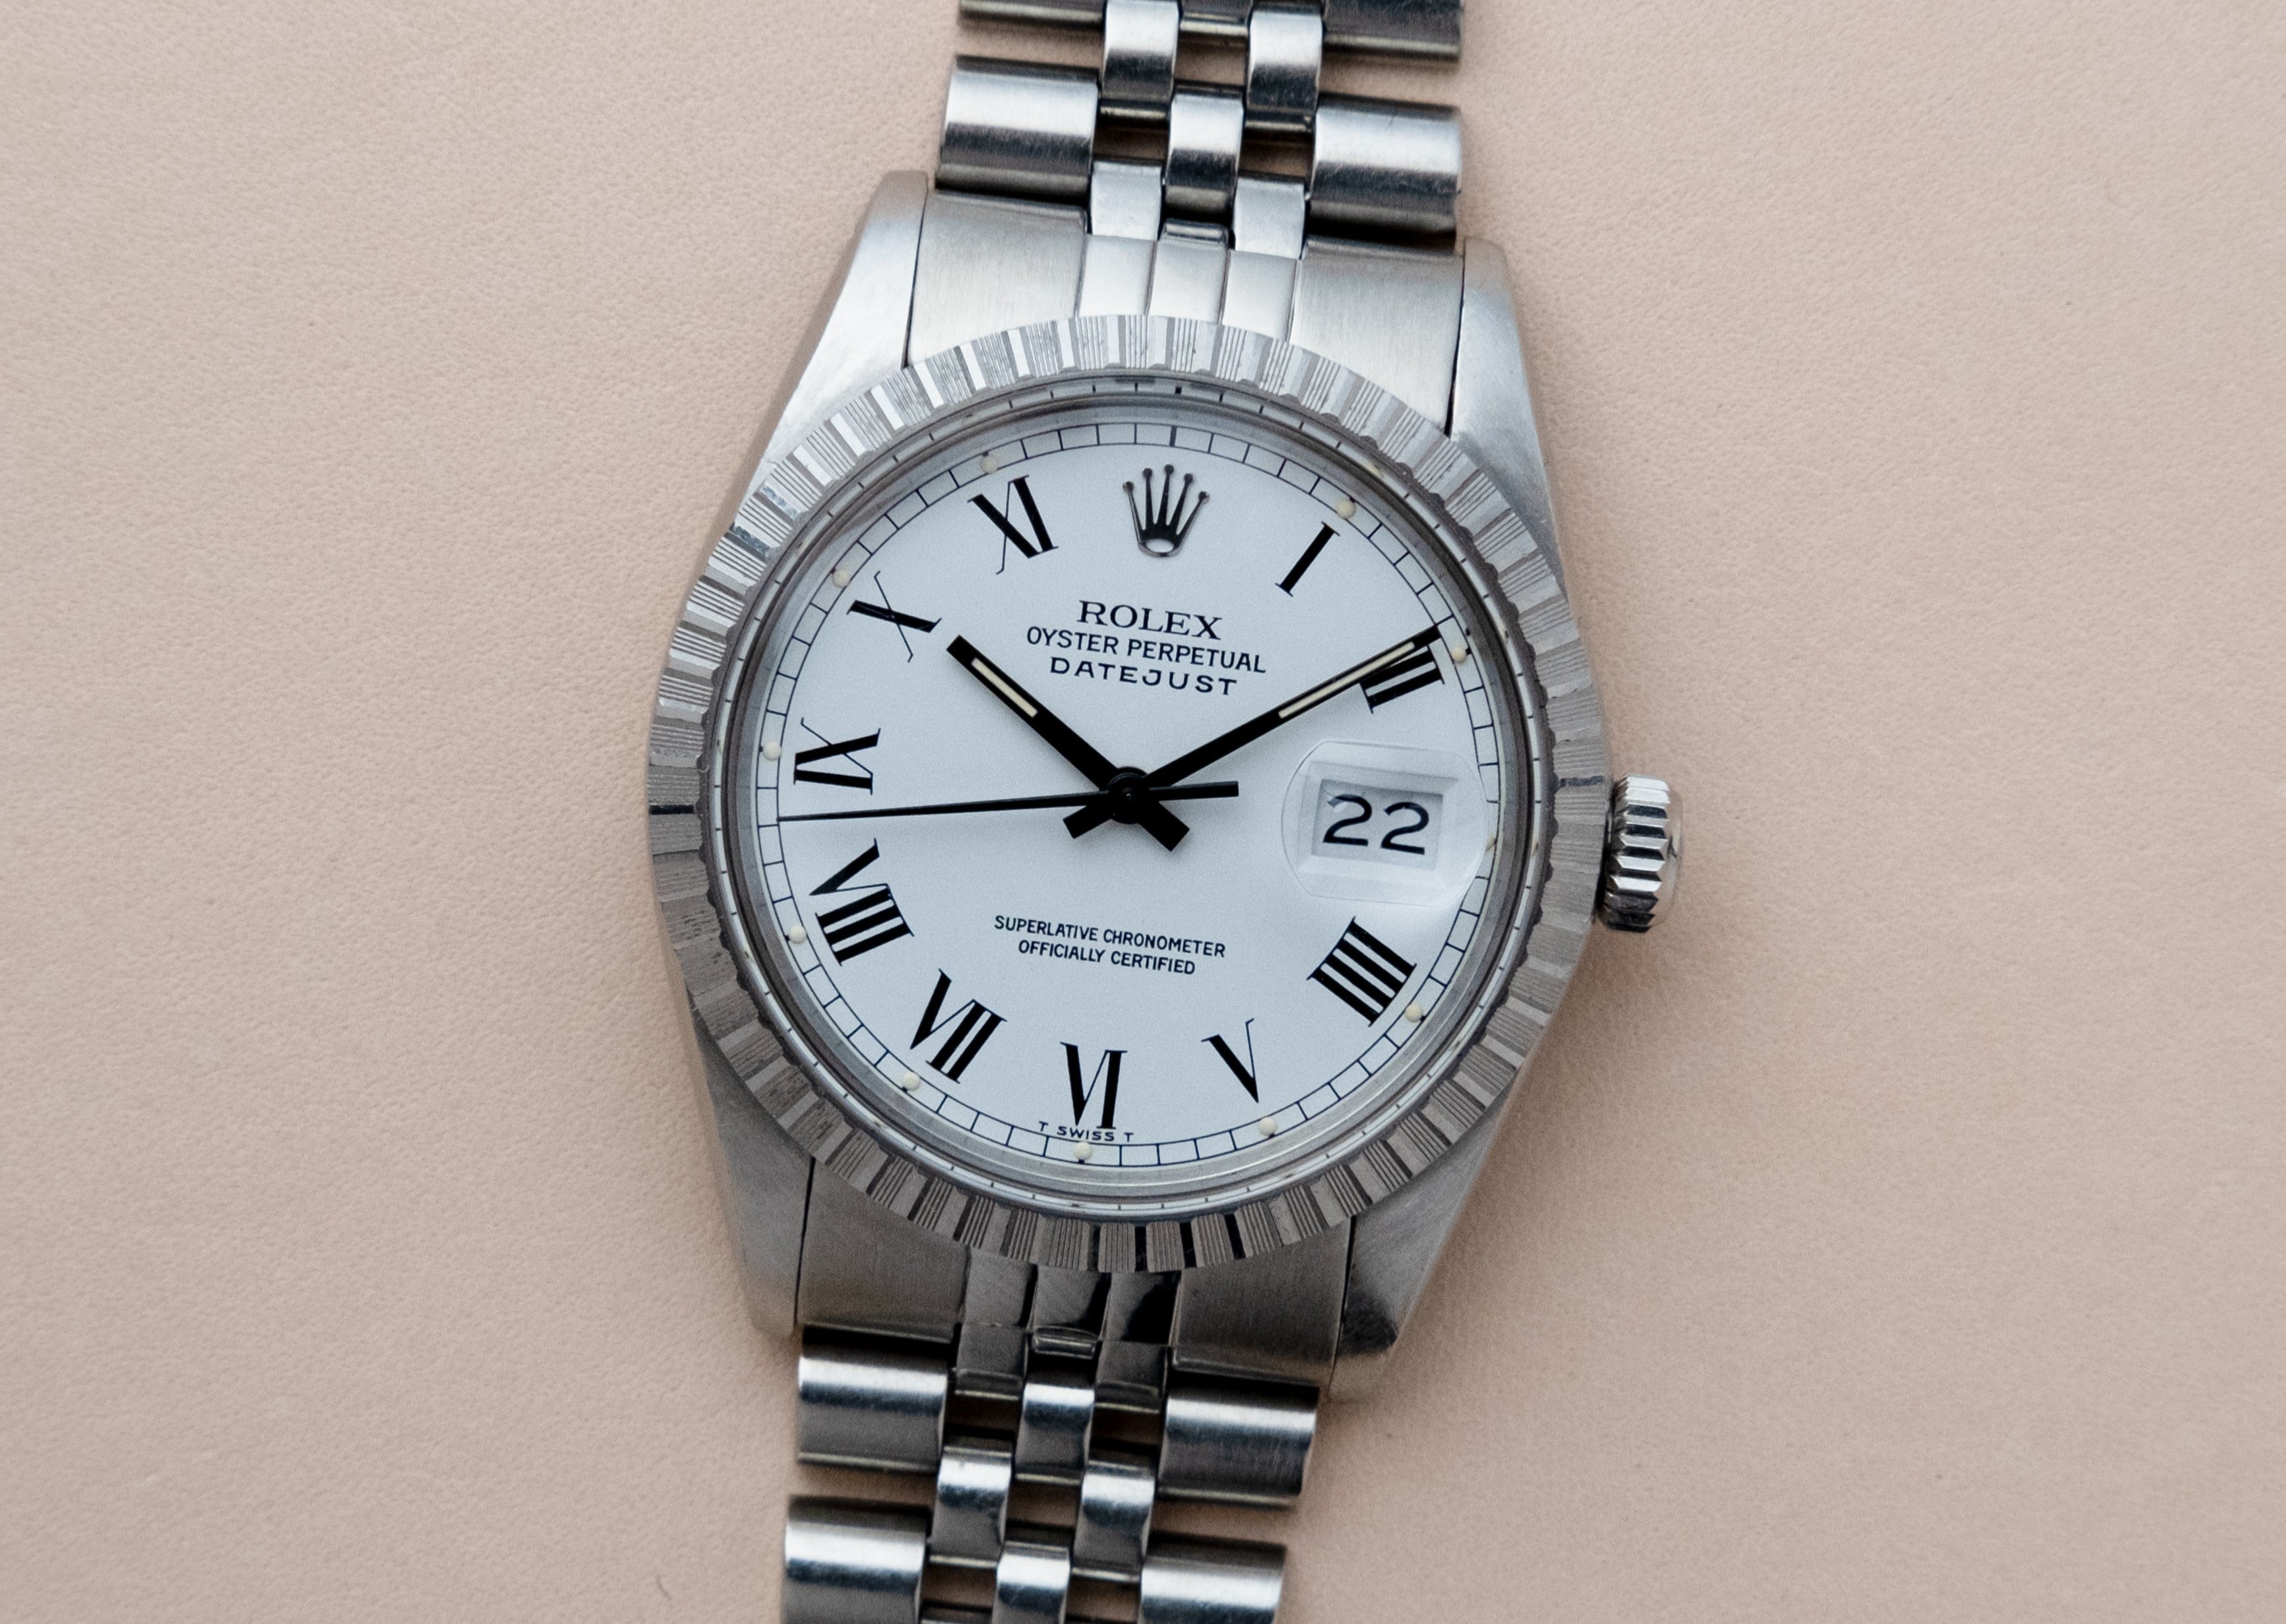 ROLEX Oyster Perpetual Datejust Ref. 16030 Buckley Dial (1985)